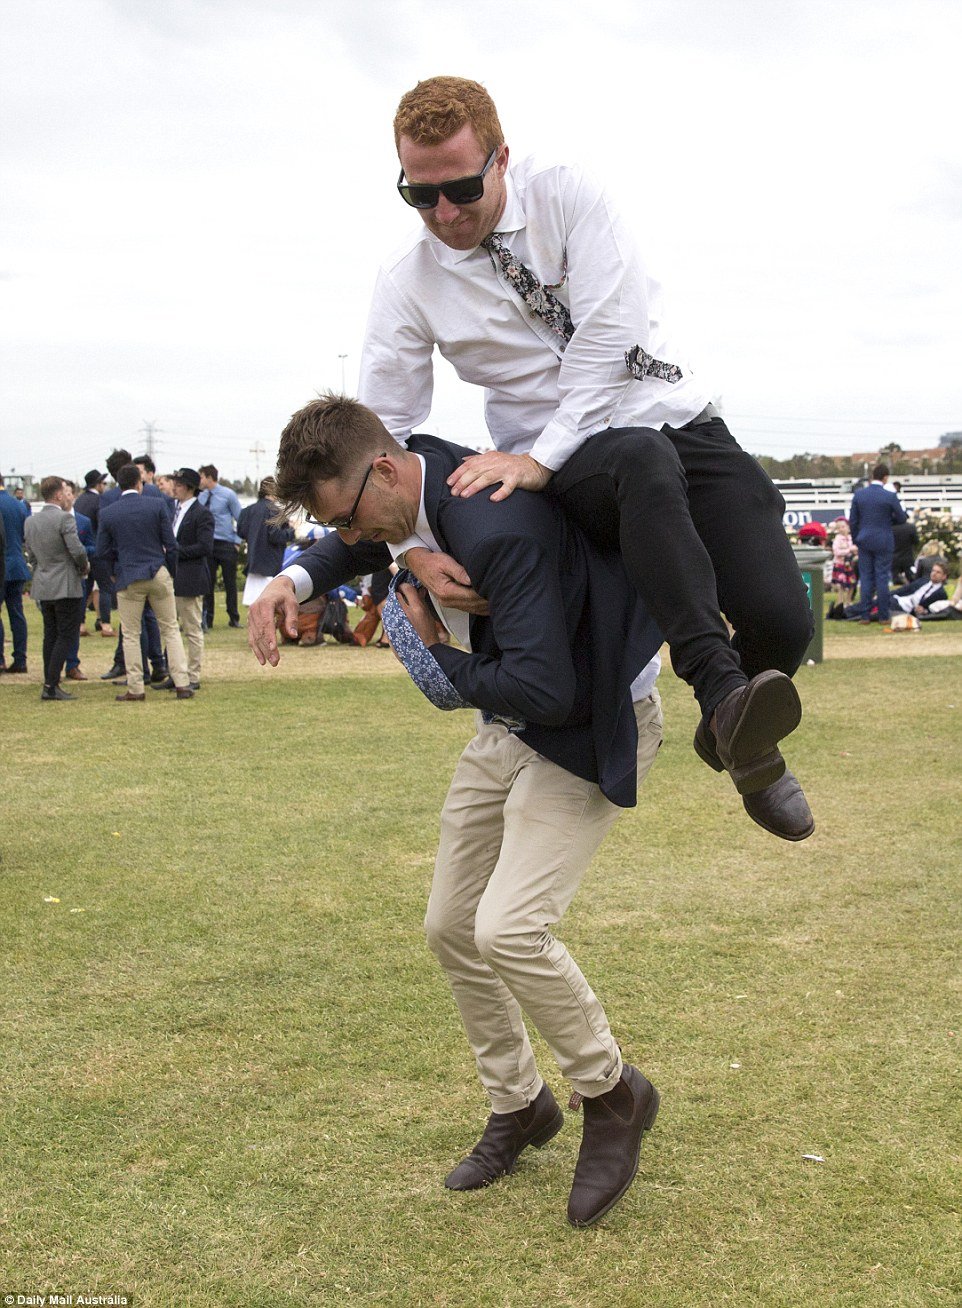 Using the full force of his body weight, one man is seen launching himself into the air and onto his unsuspecting mate